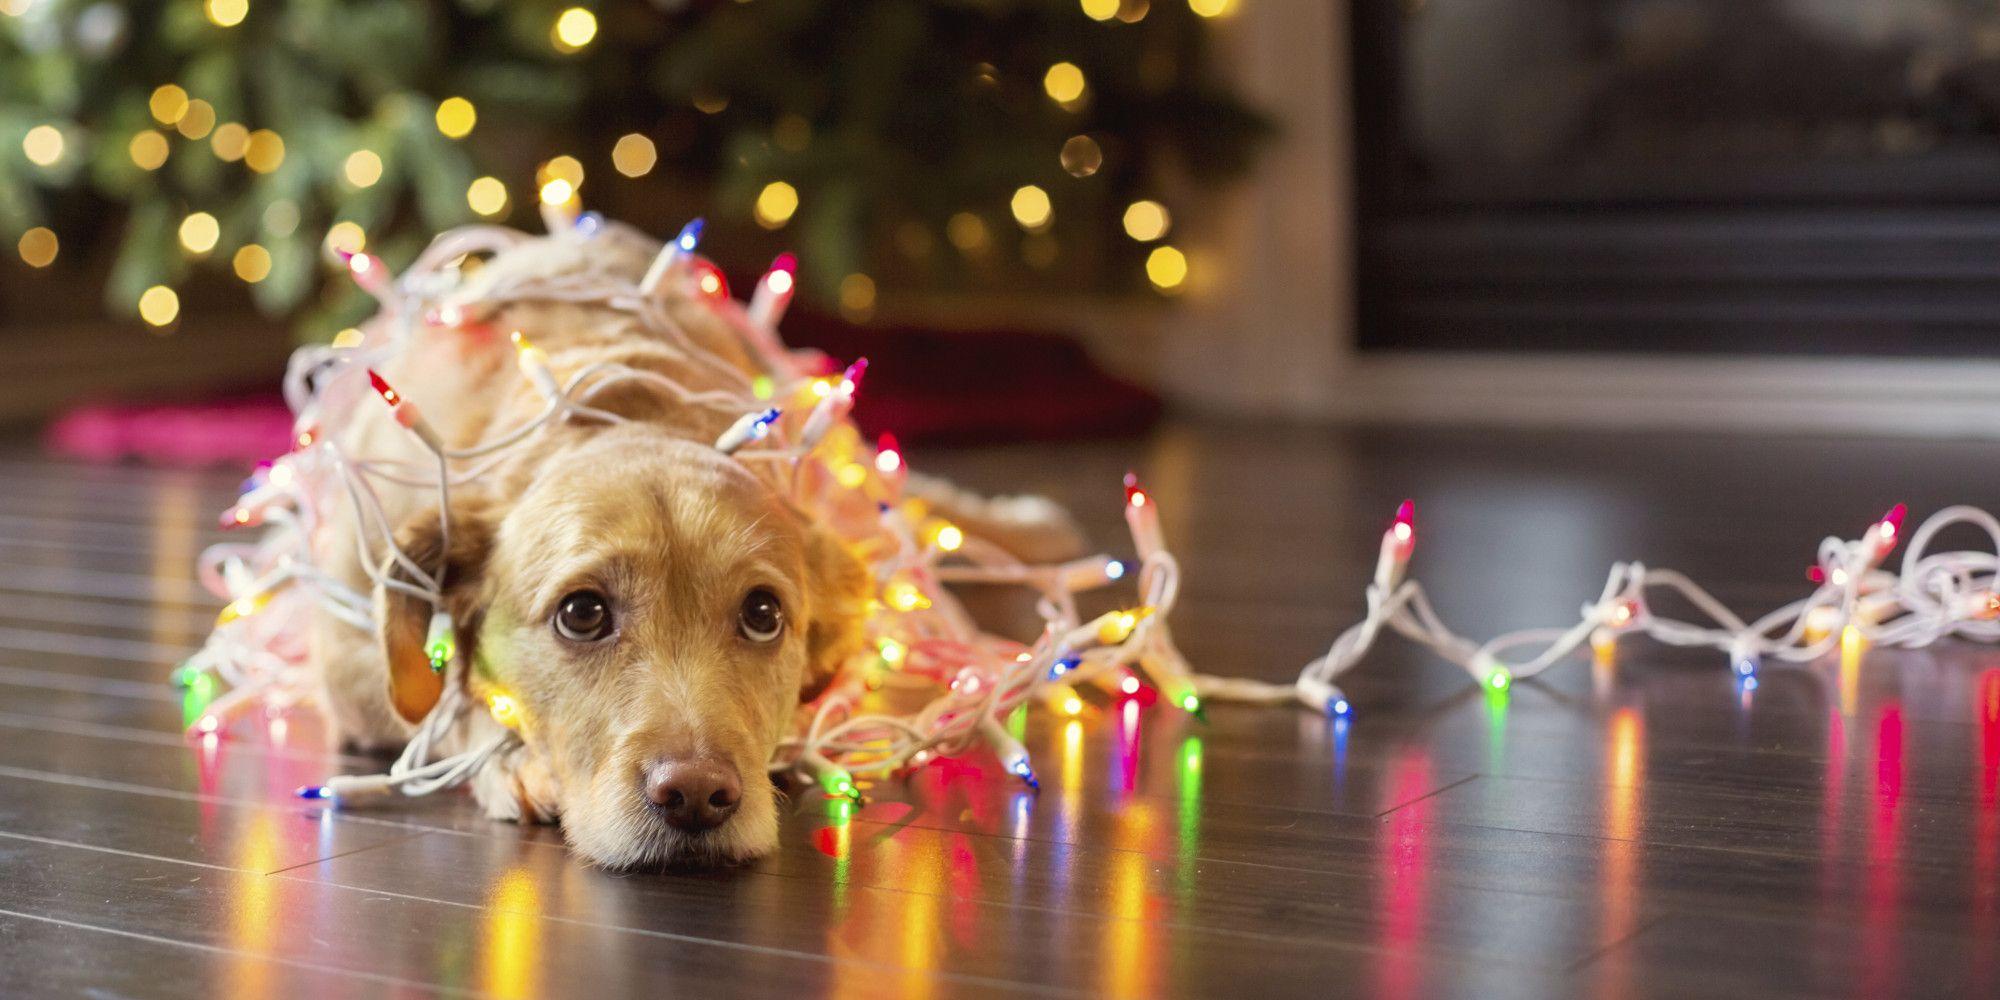 Get Inspired For Puppy Cute Wallpaper Christmas Dog wallpaper